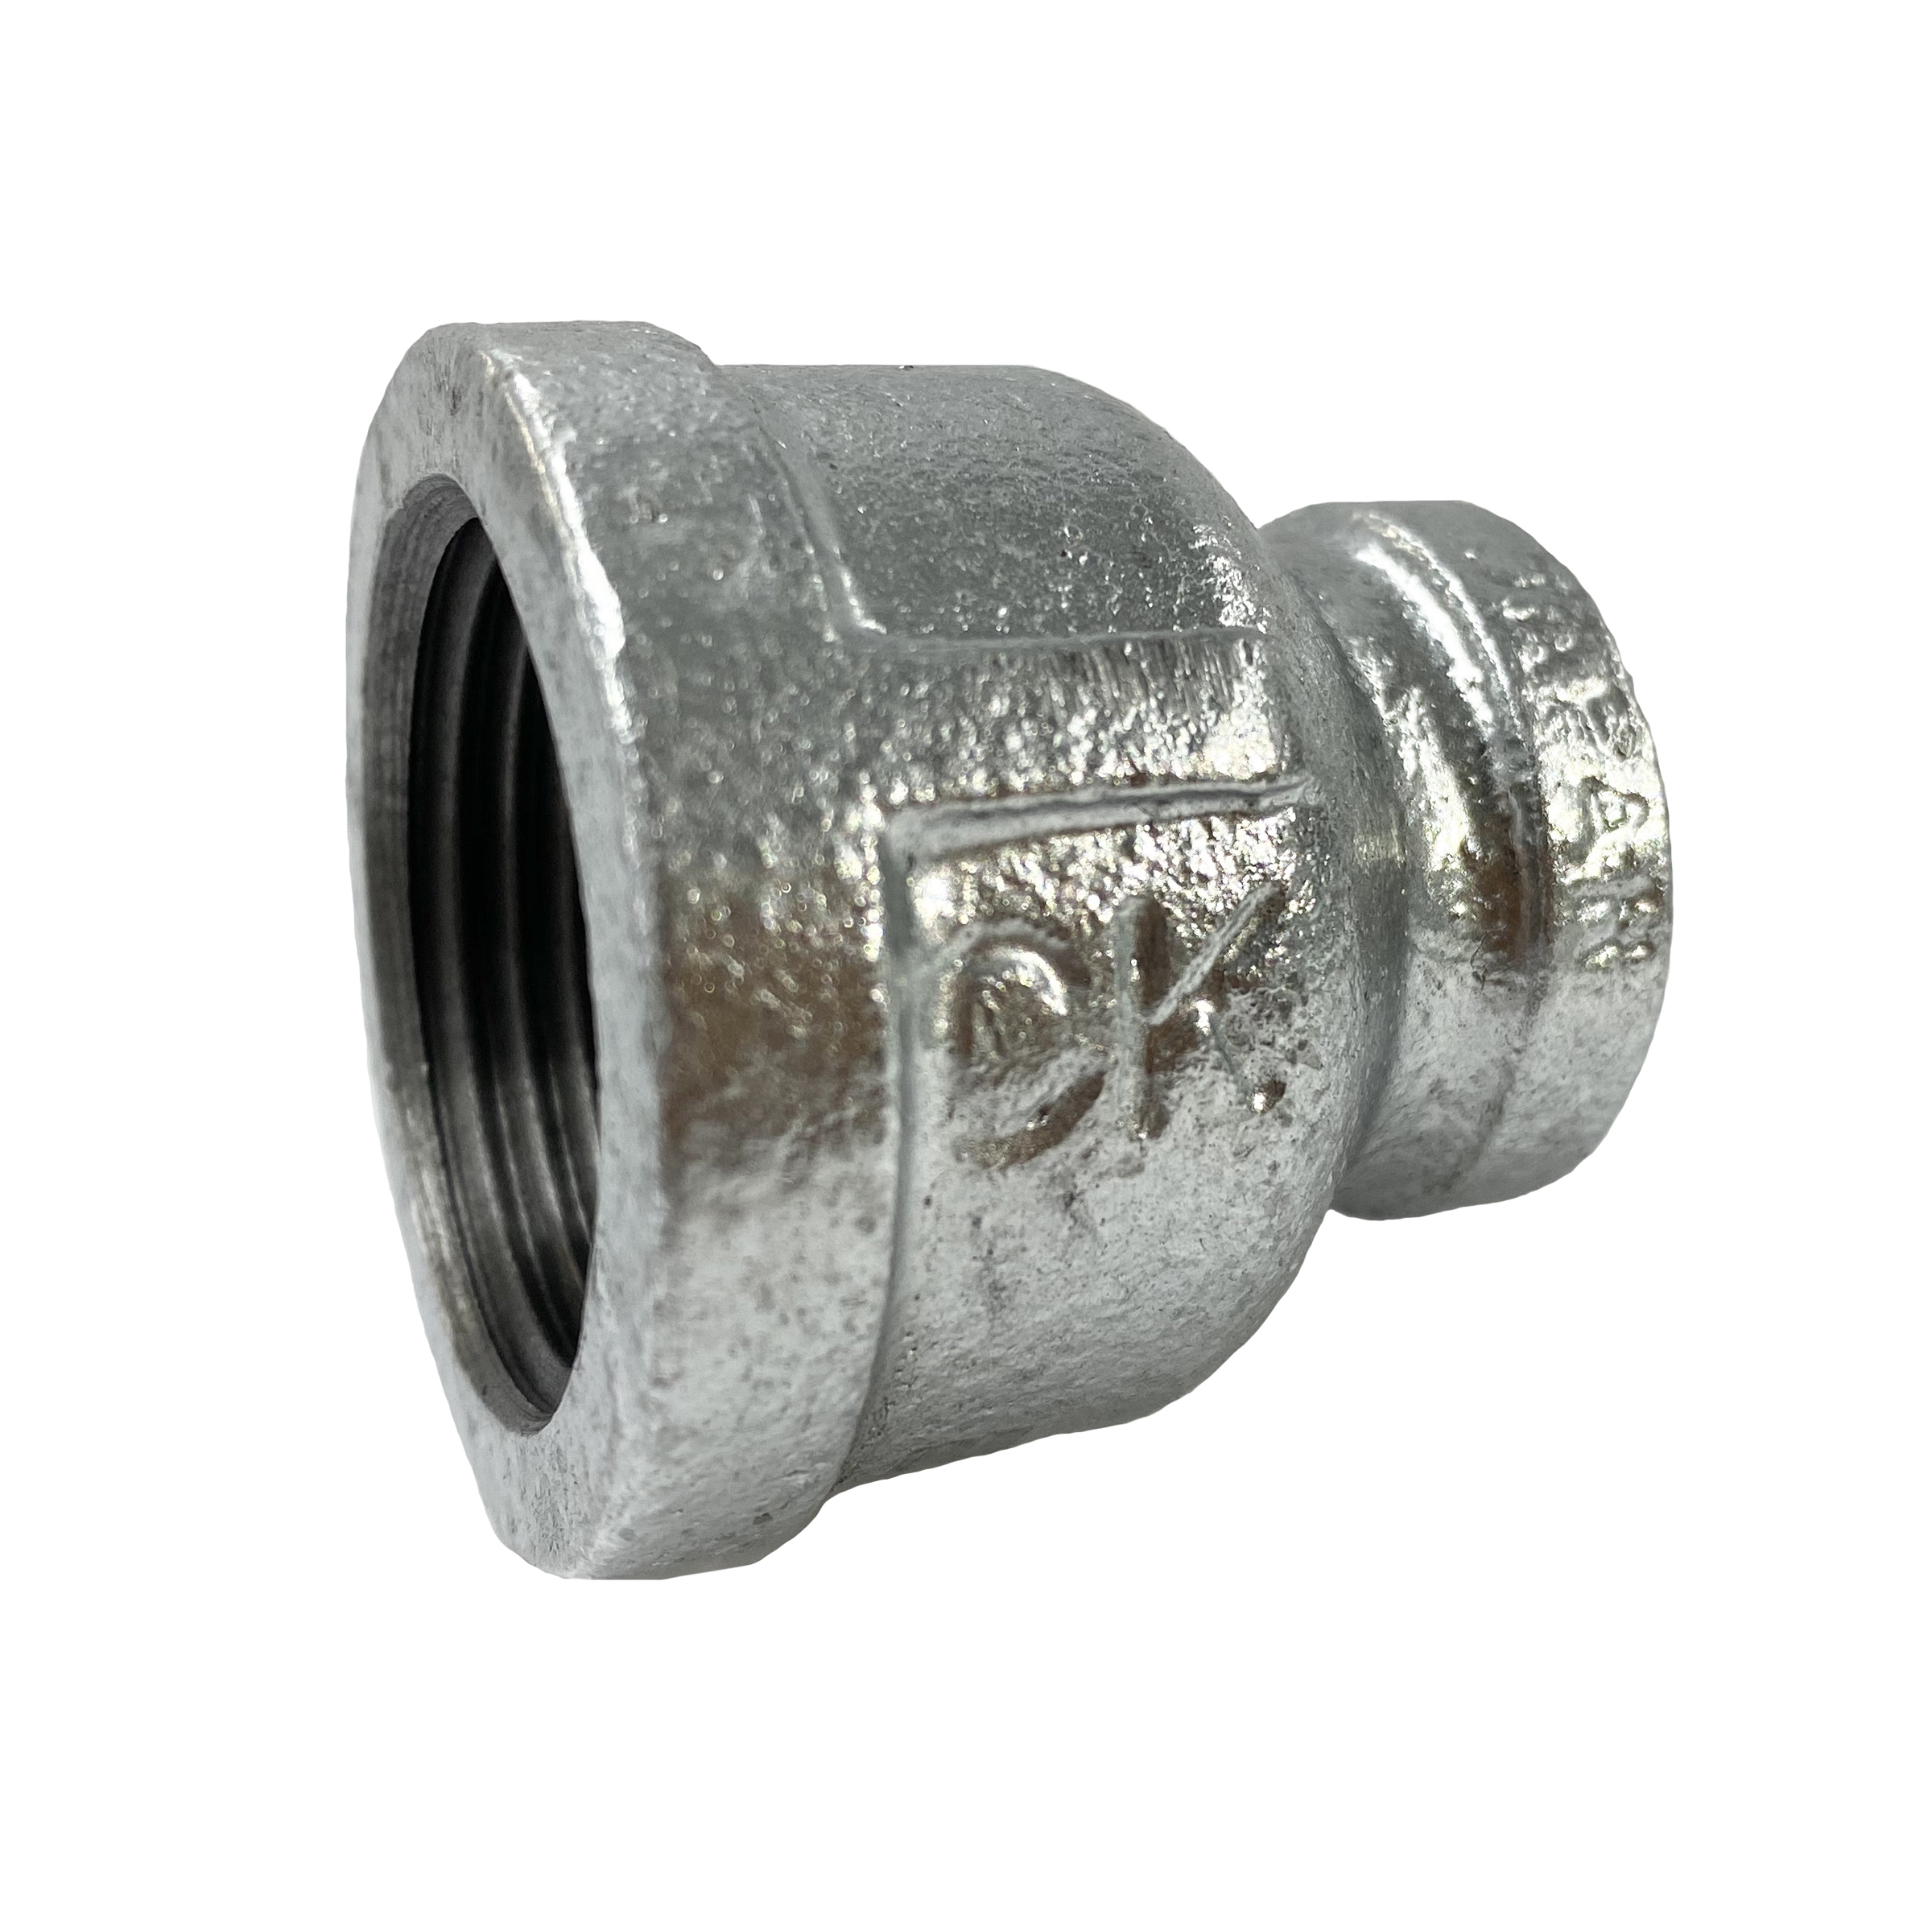 CK Fittings - Screw-in Type Malleable Cast Iron Pipe Fitting - Socket with Different Diameters with Band BRS-25X15-W